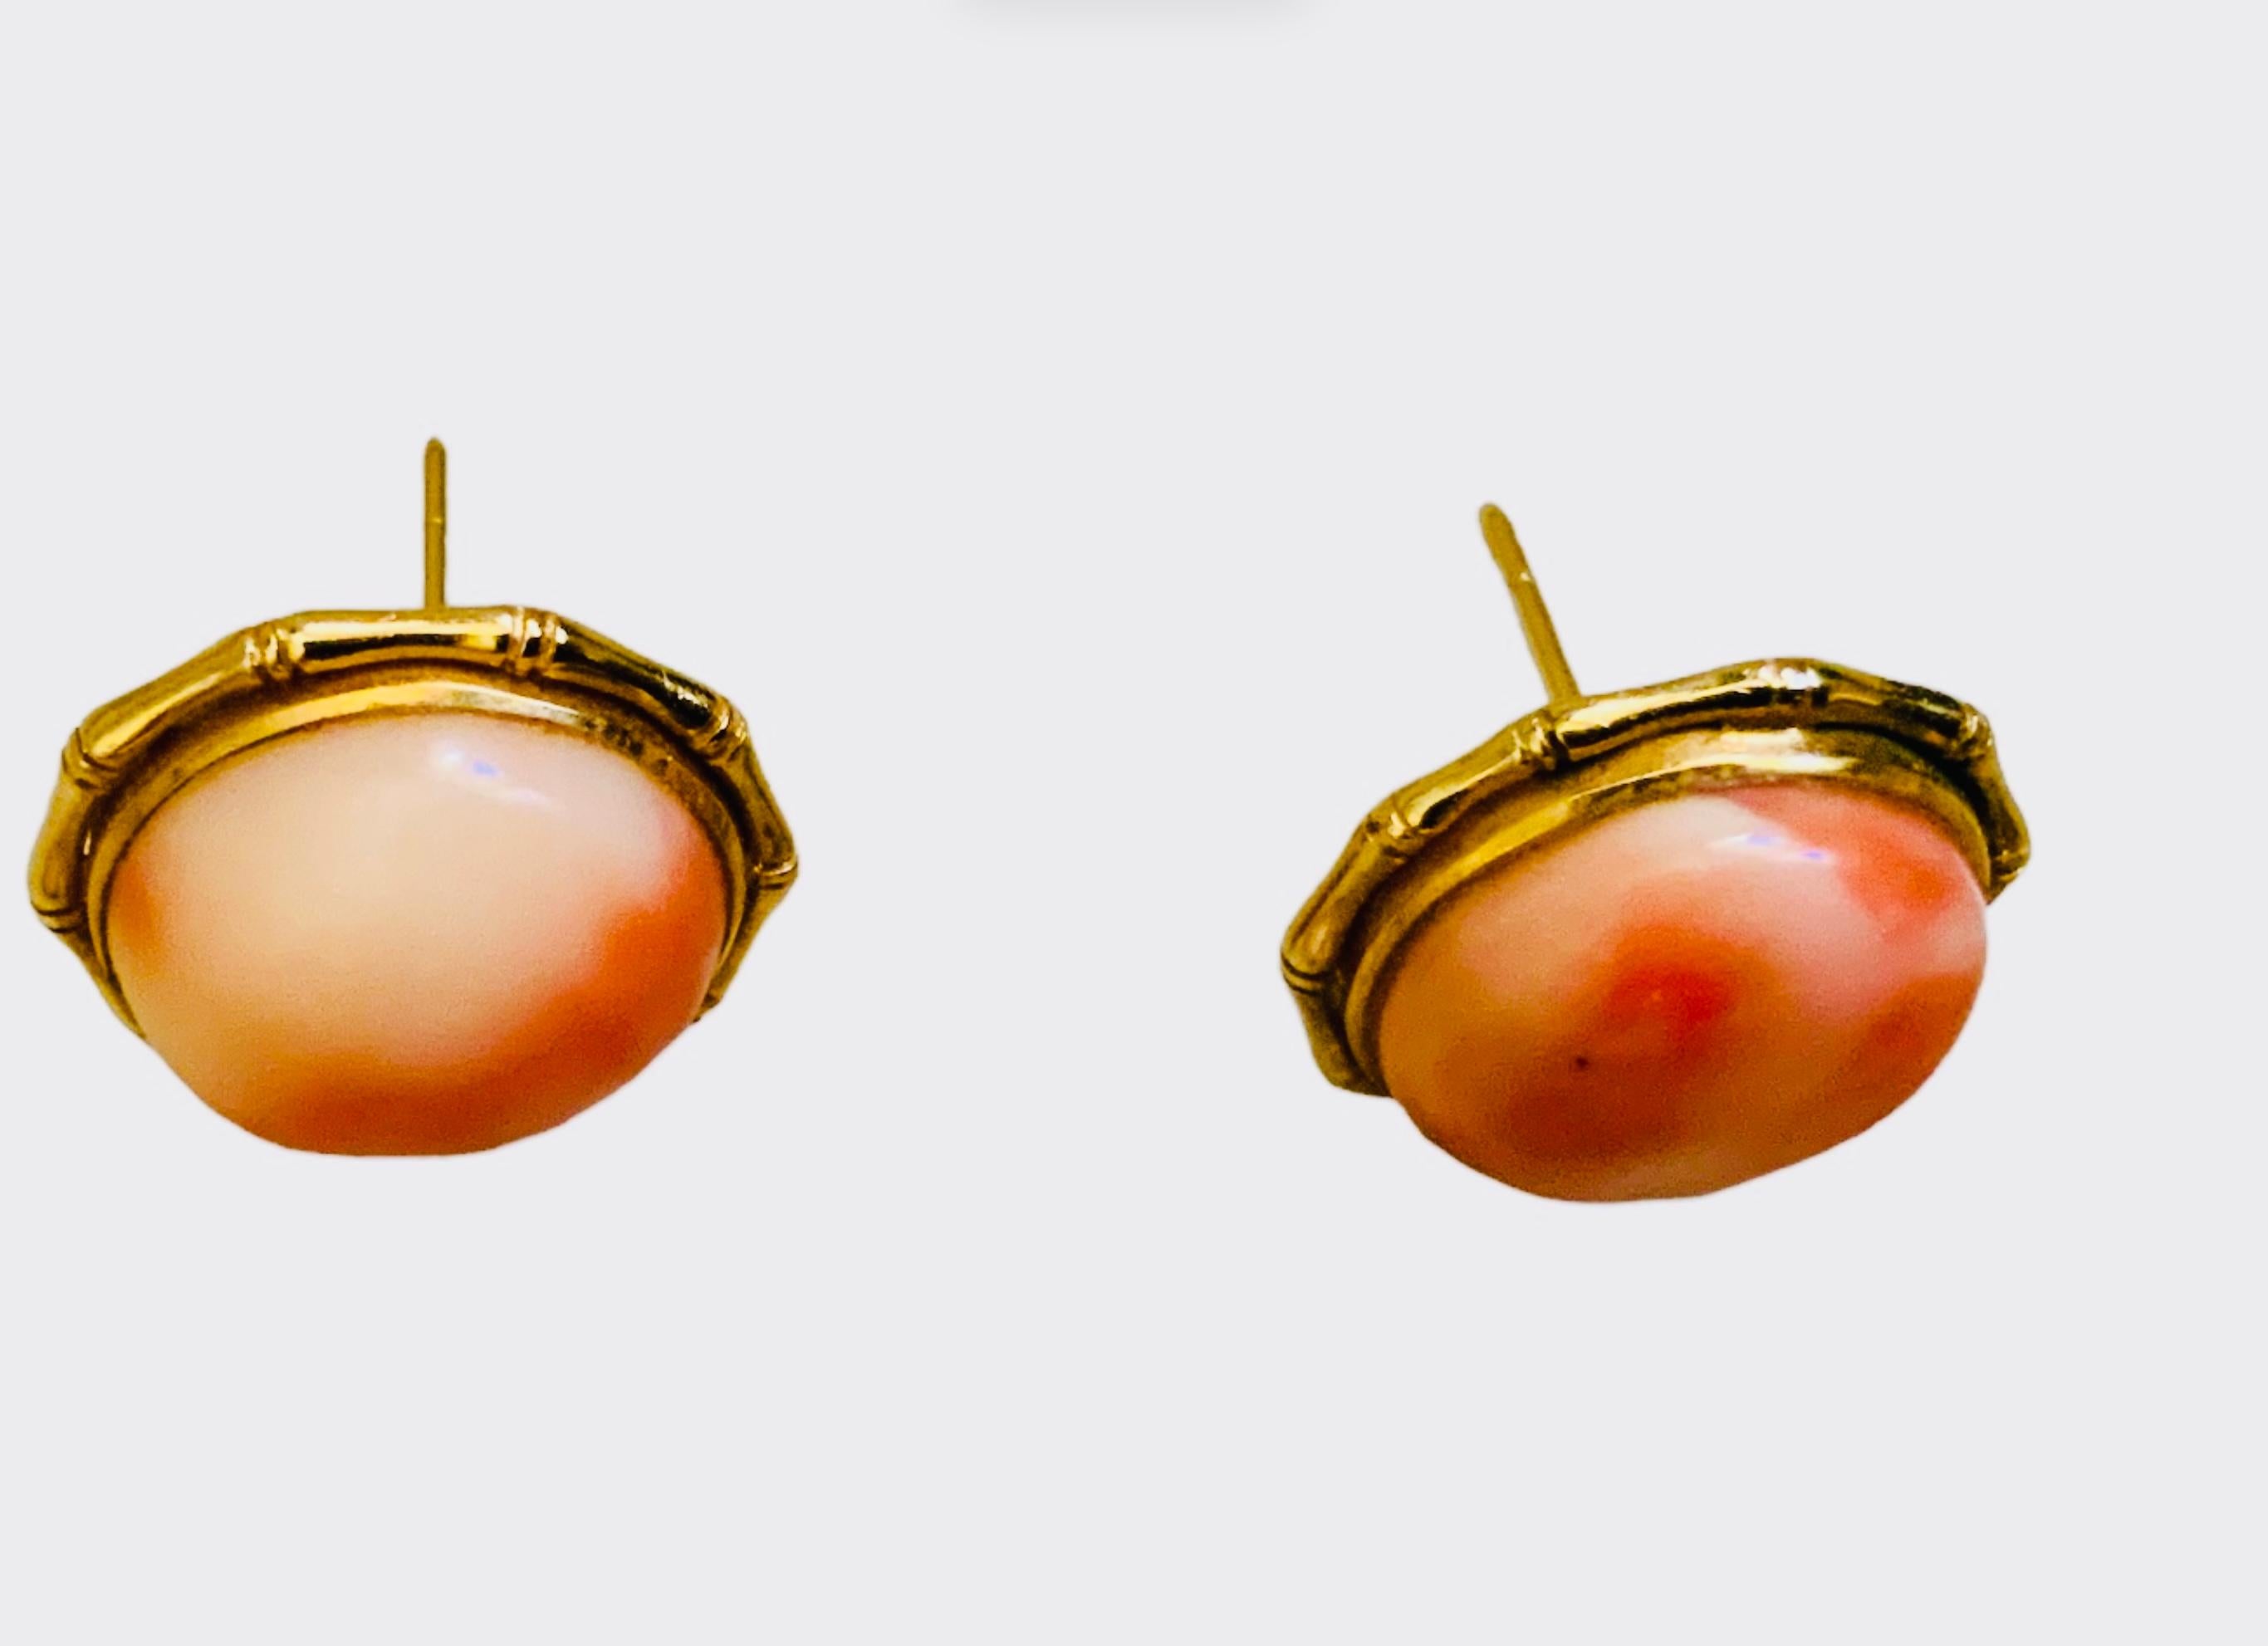 This is a 14K Gold Coral Pair of Earrings. It depicts a pair of round cabochon Corals mounted in 14 K yellow gold frames shaped as bamboo sticks joined together.